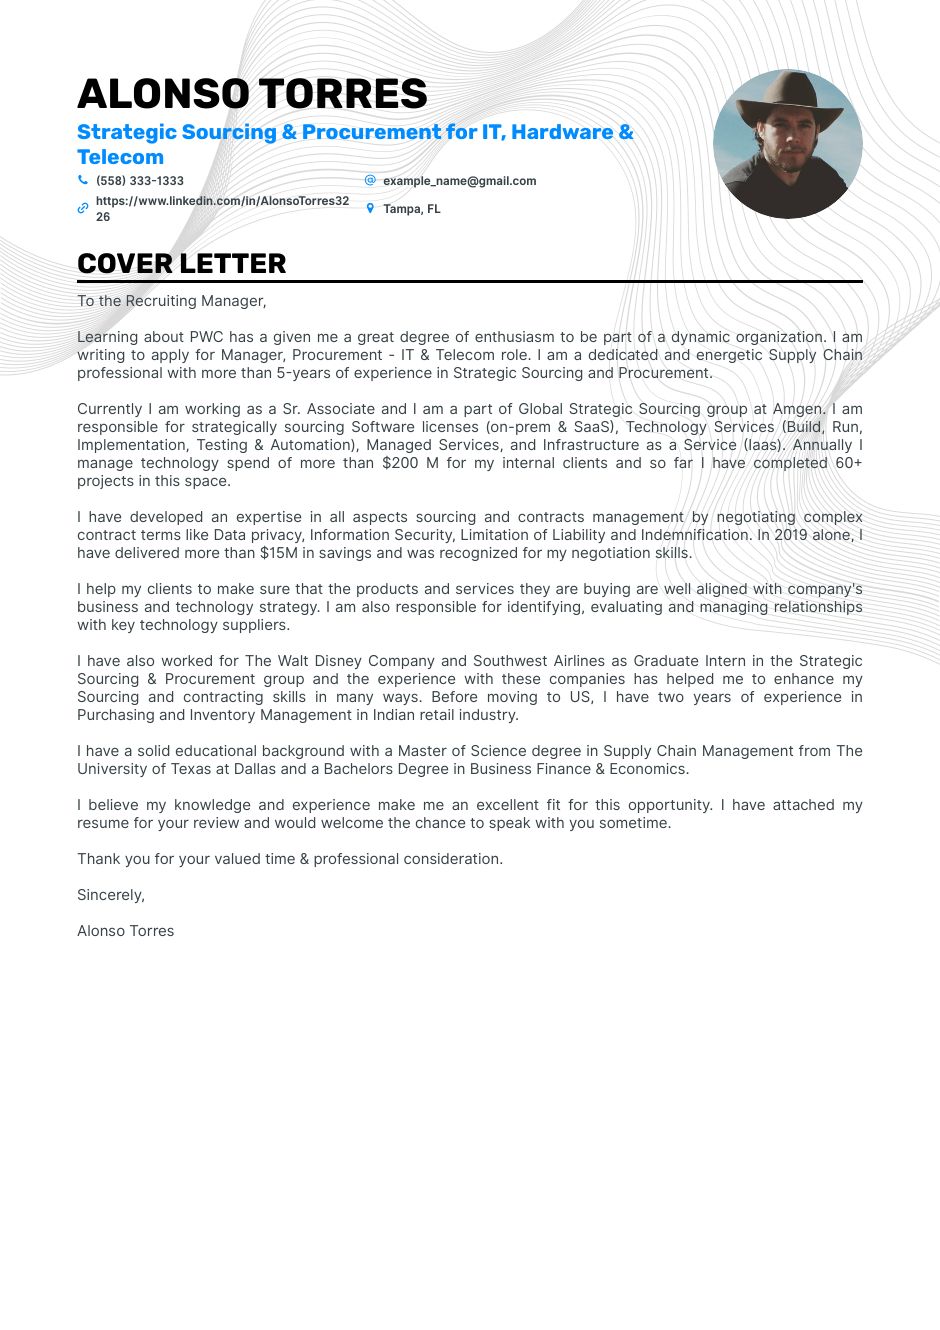 procurement-manager-coverletter.png